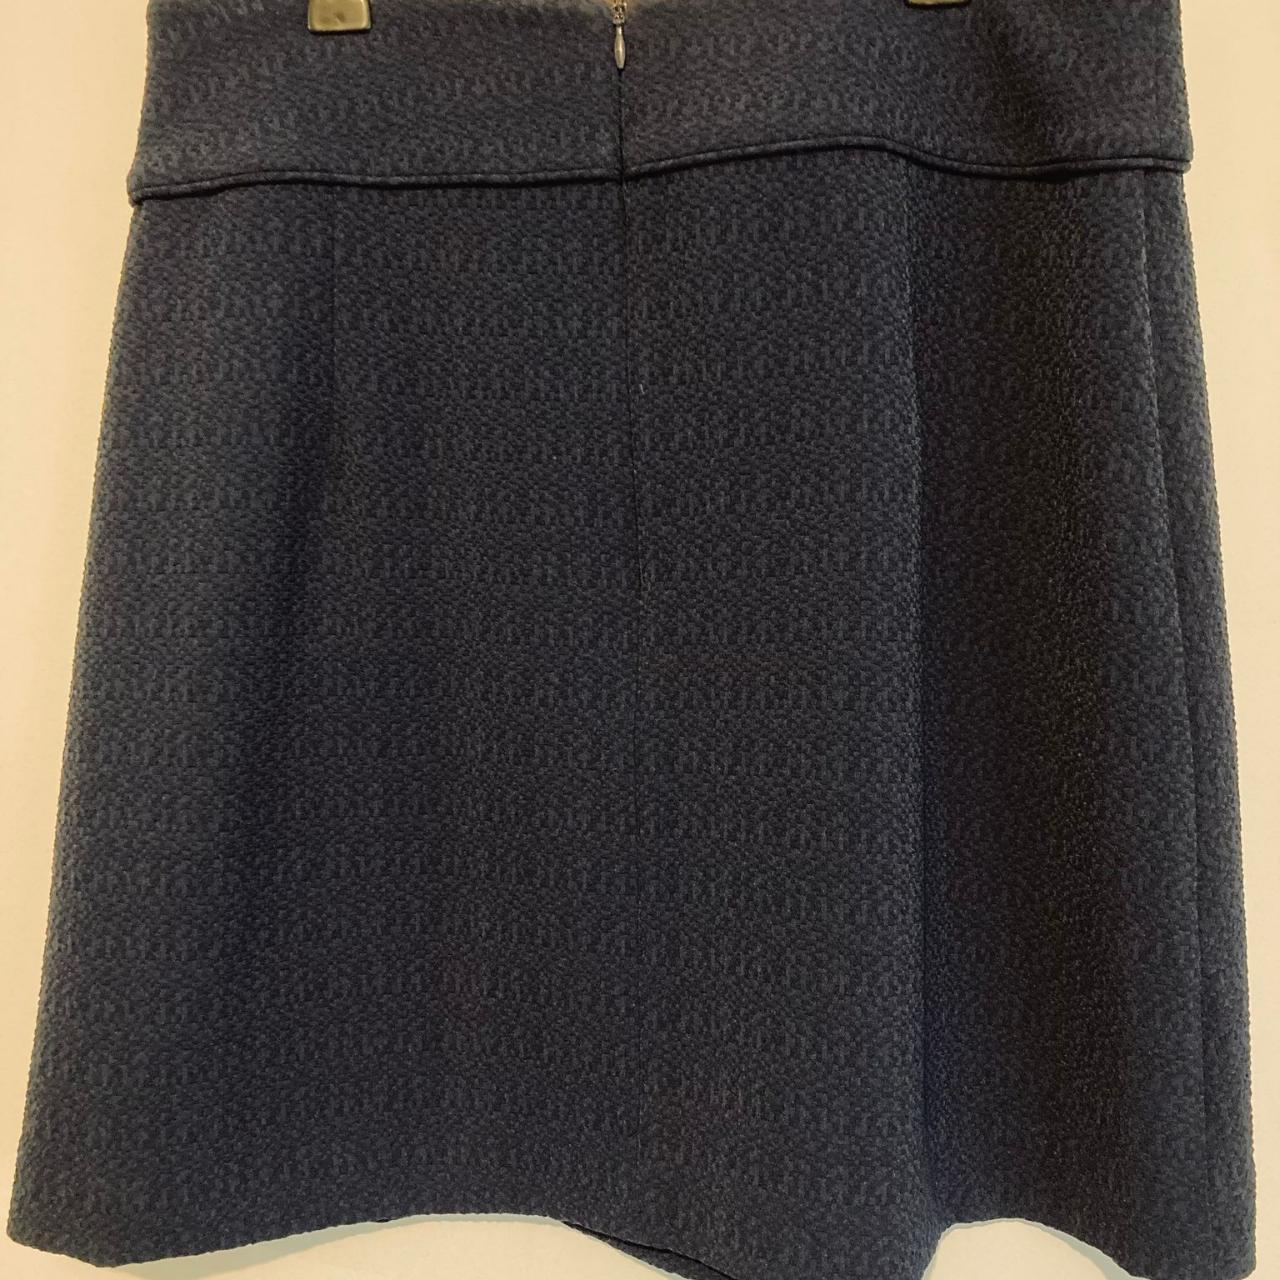 Review navy skirt bow on the front waist band - Depop